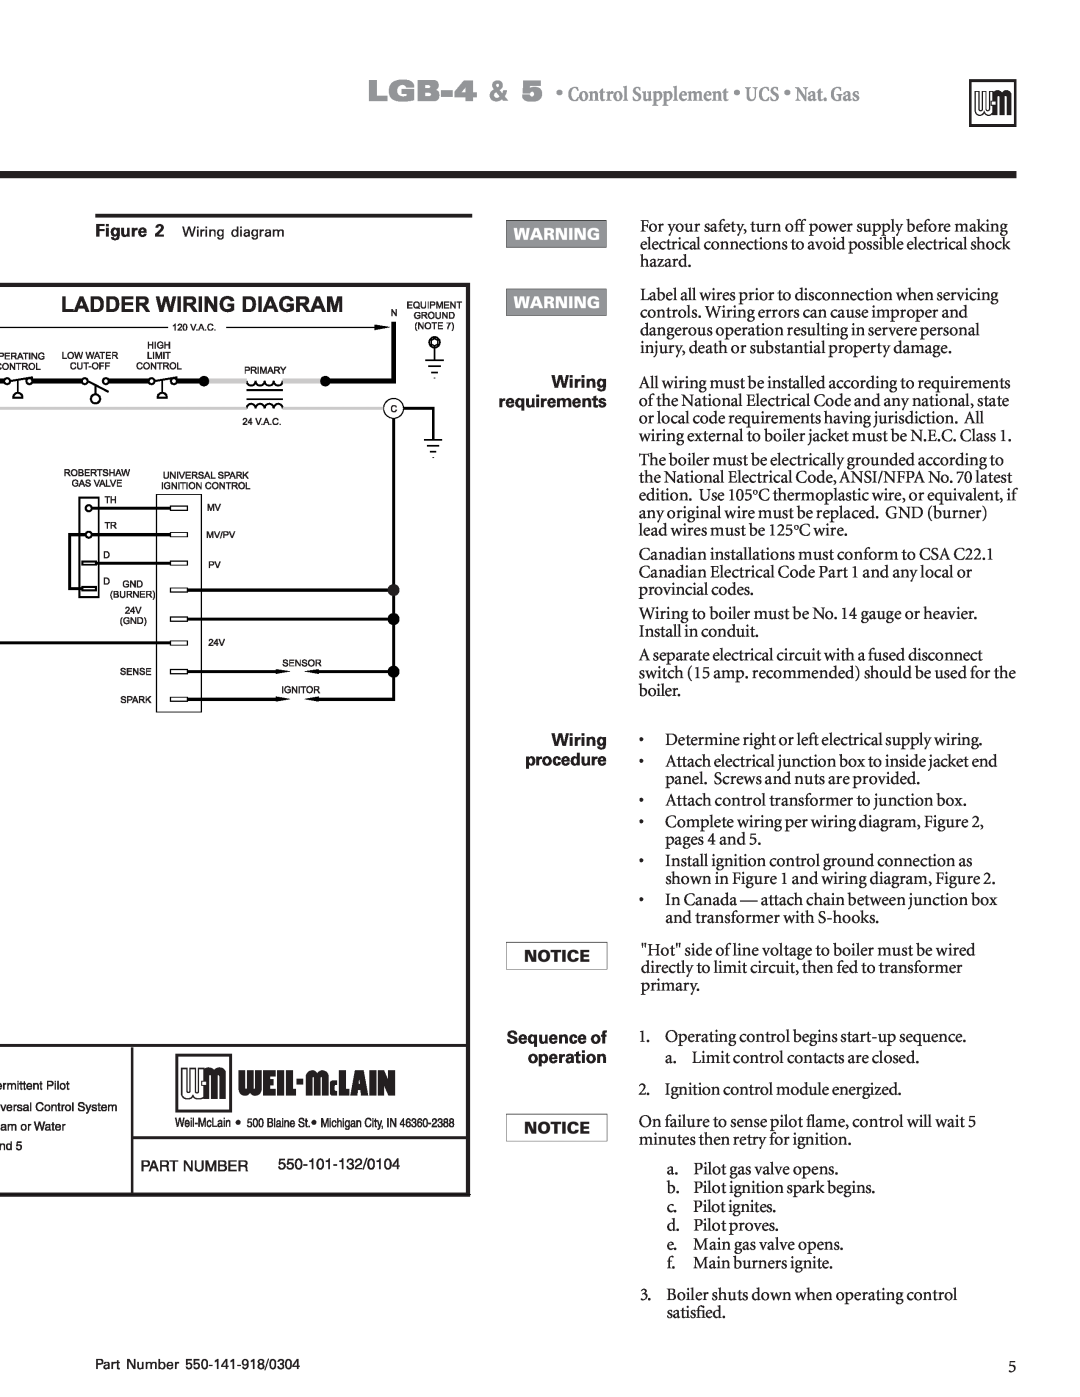 Weil-McLain LGB-5 Wiring requirements, Sequence of operation, LGB-4& 5 Control Supplement UCS Nat. Gas 